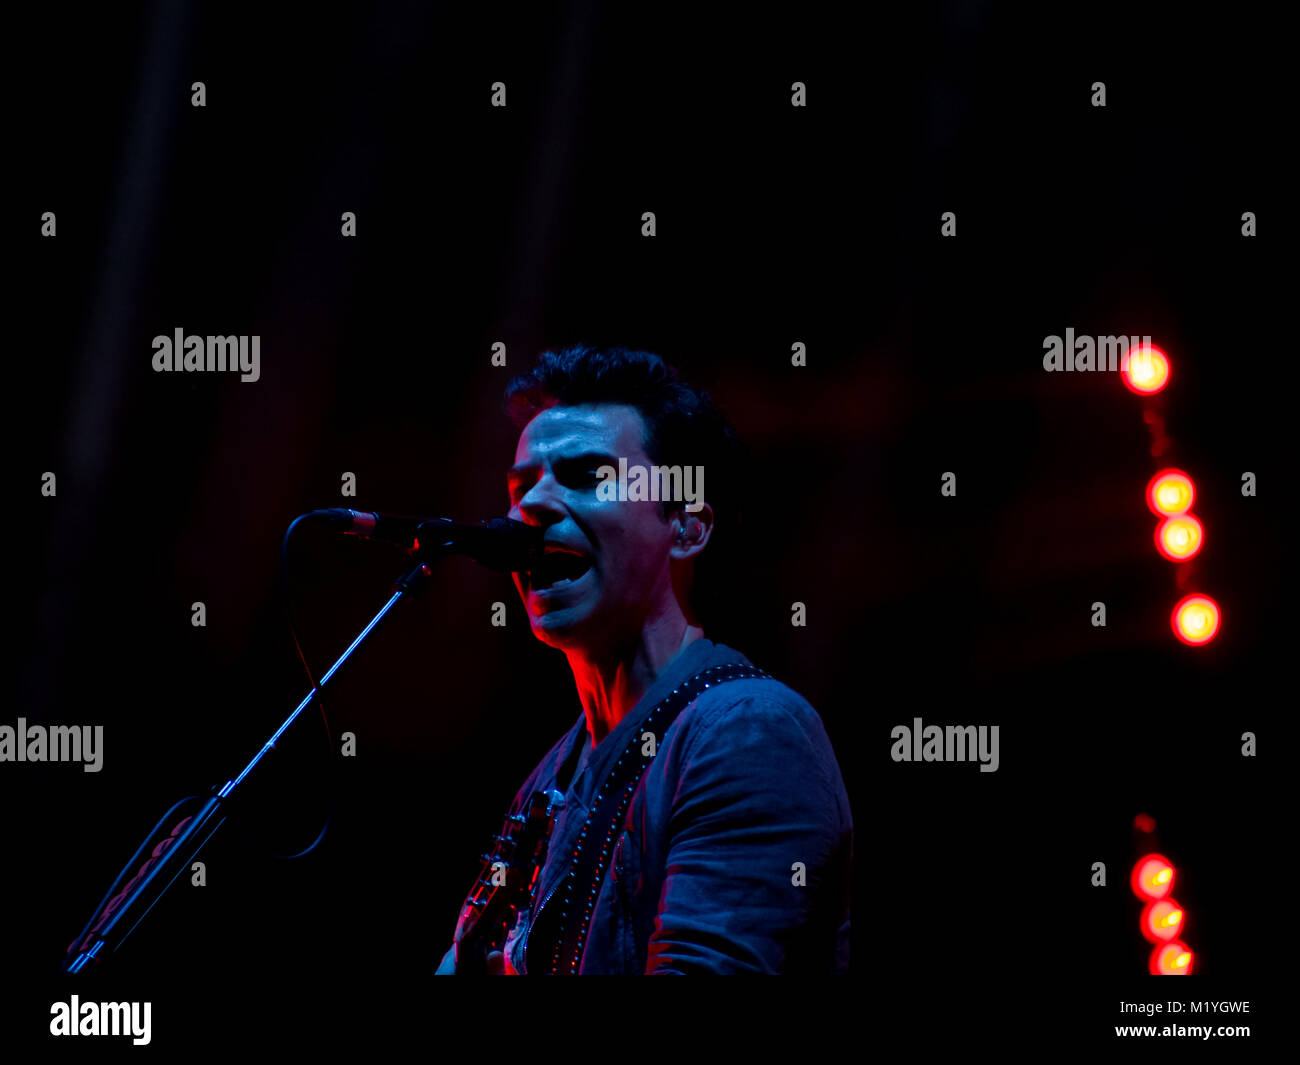 Kelly Jones of the Rock band The Stereophonics performs live on stage Stock Photo